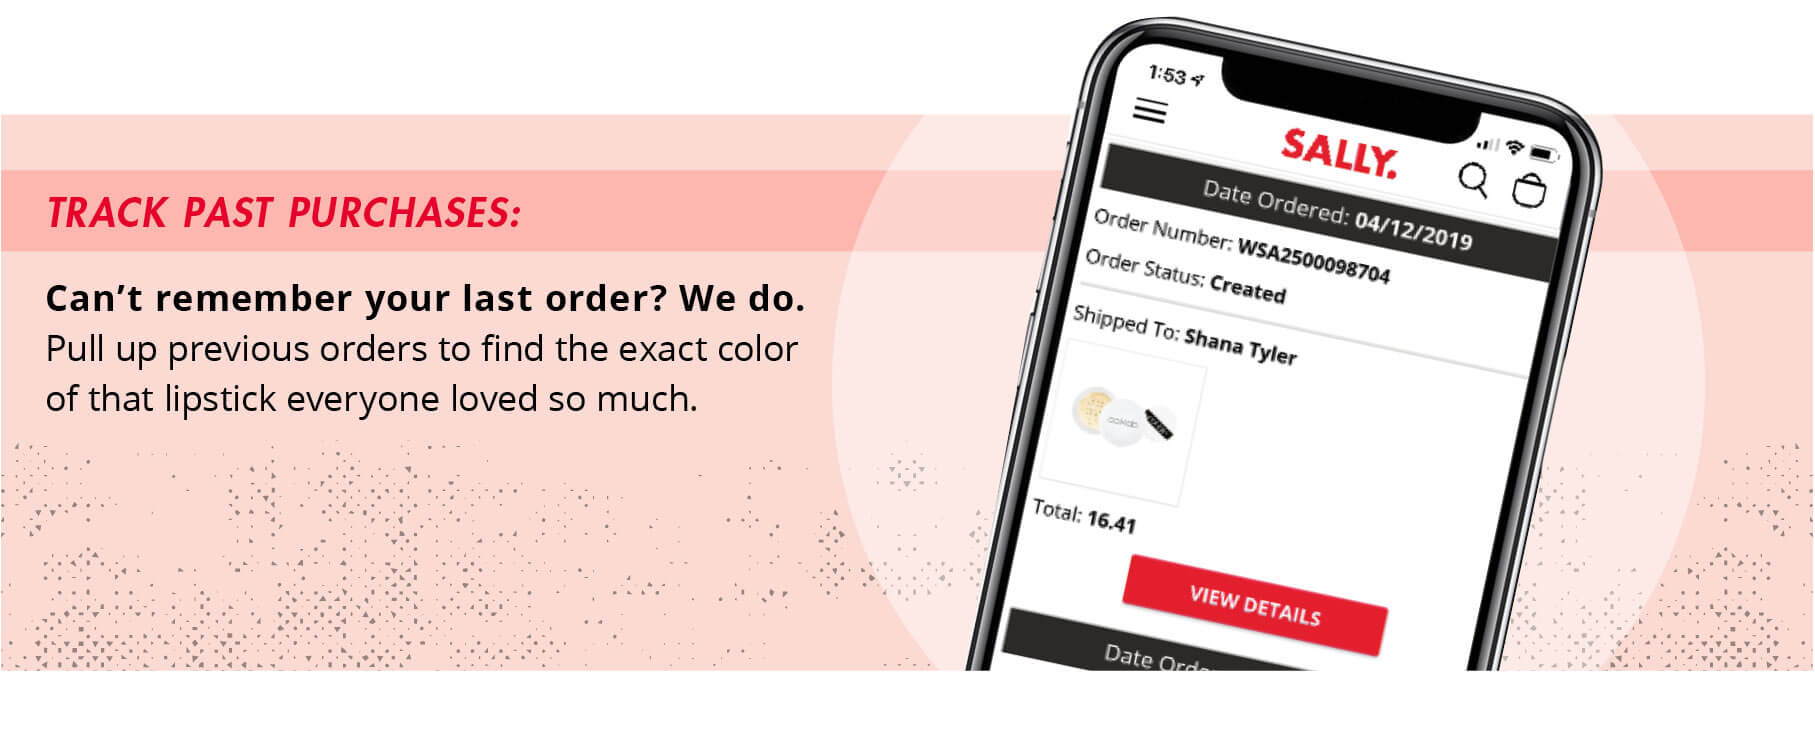 Track past purchases: Can't remember your last order? We do. Pull up previous orders to find the exact color of that lipstick everyone loved so much.